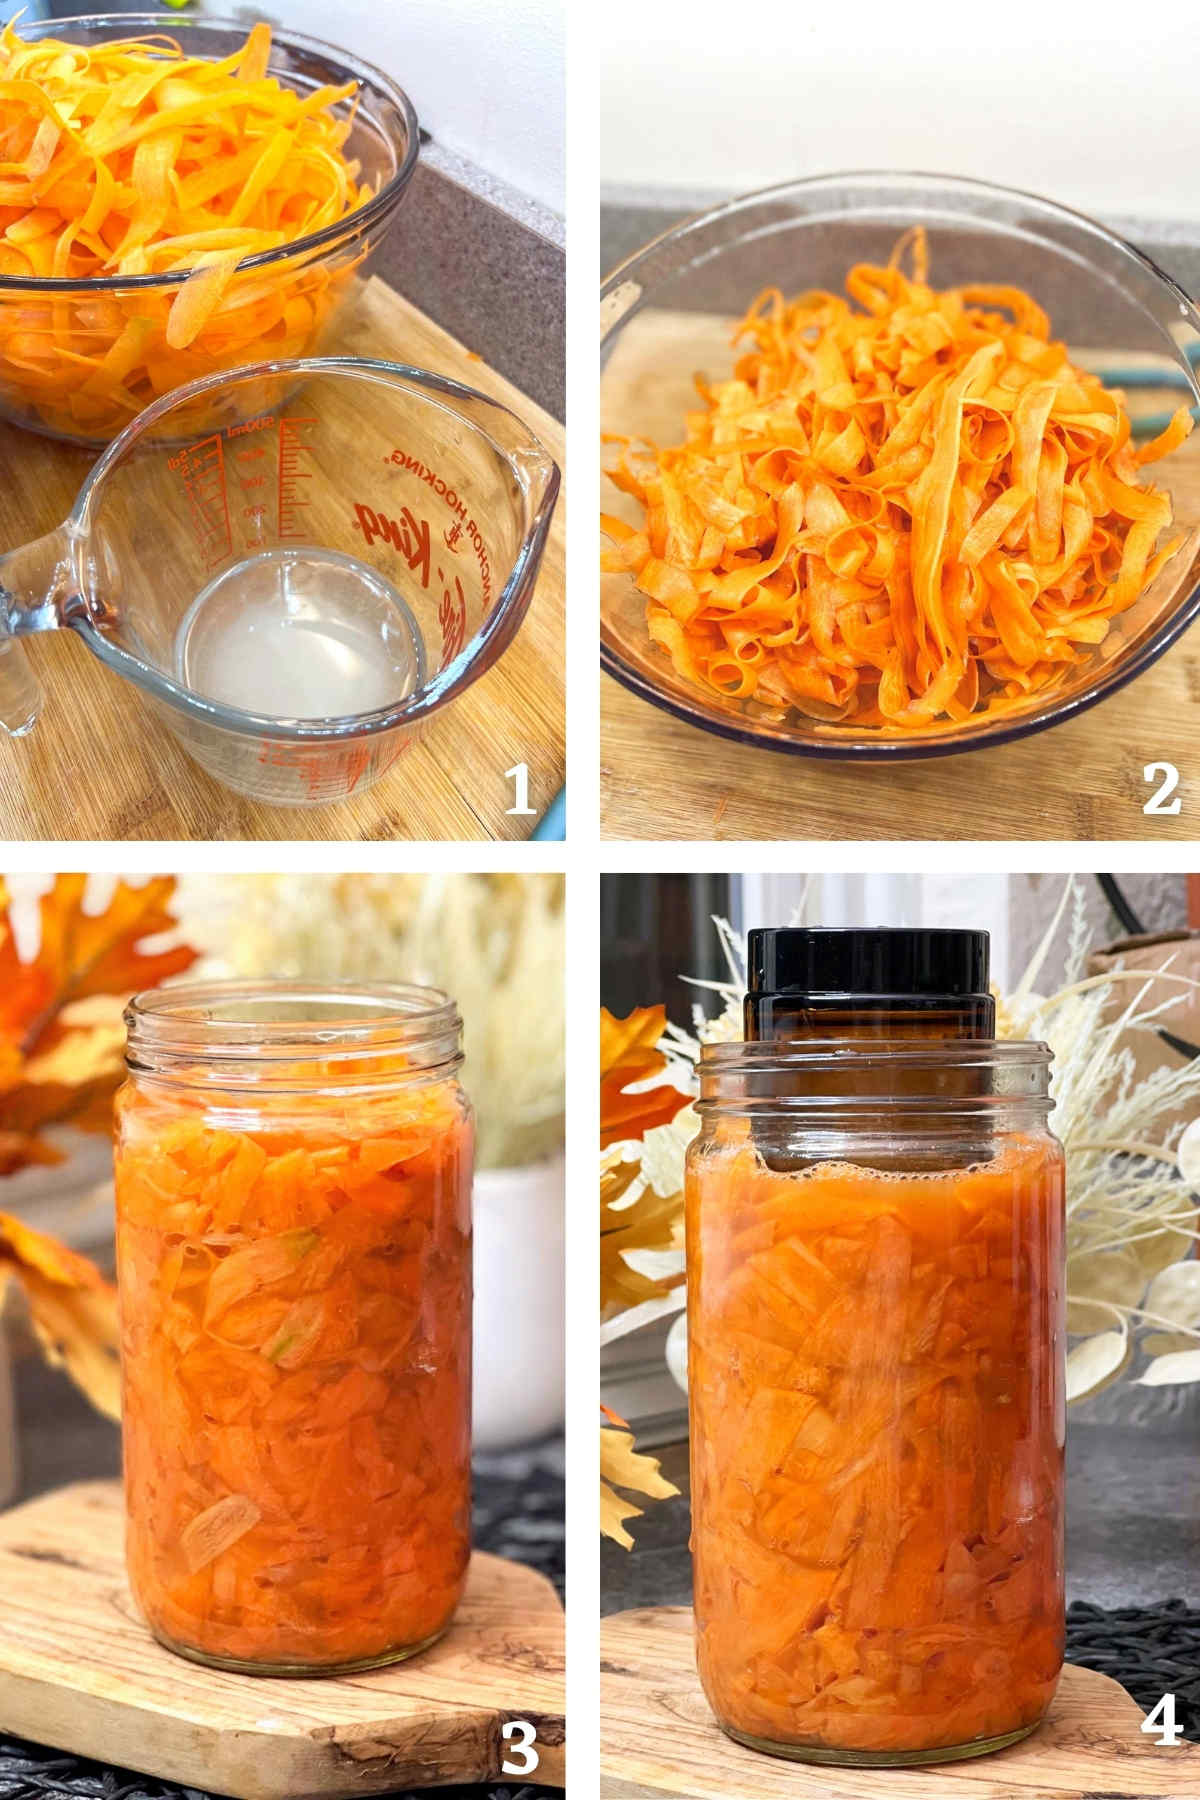 Process shots showing how to ferment shaved carrots with salt in a jar.